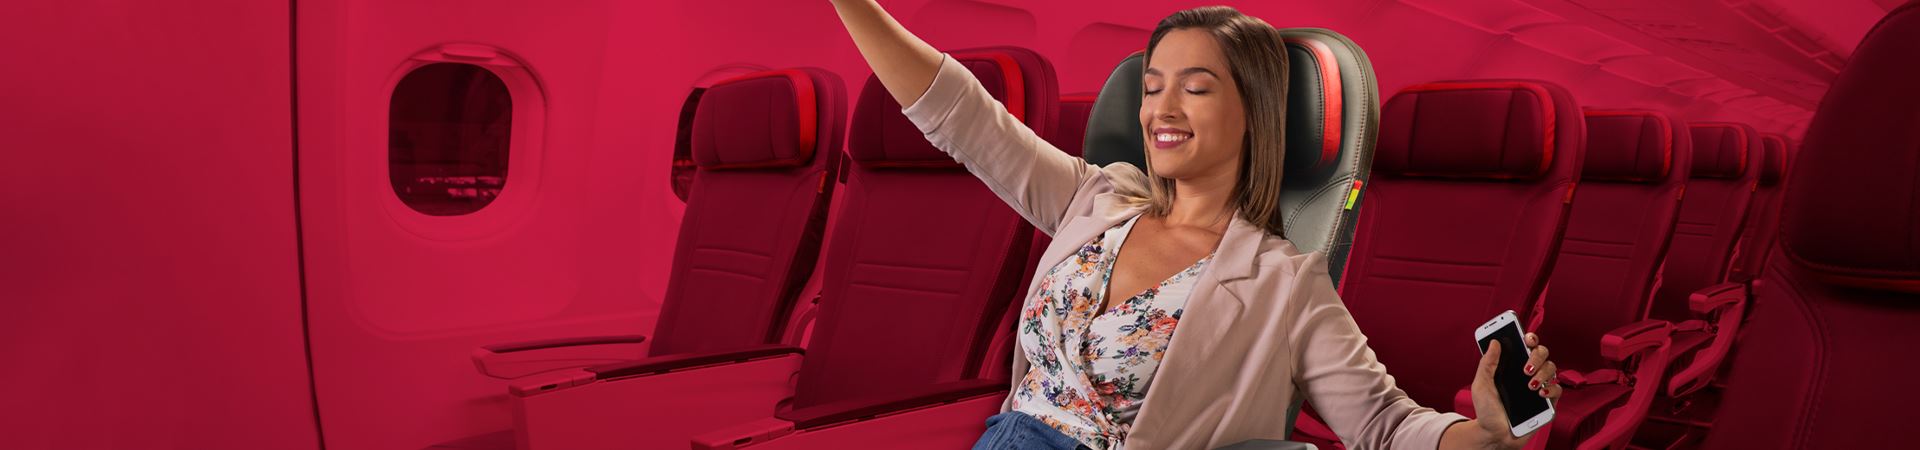 Close shot of a lady sitting in the EconomyXtra seats, inside an airplane. Her eyes are closed, and she is smiling and with open arms. In the left hand she holds a white phone. She is wearing a white sweater with flowers, jeans and a light pink blazer.